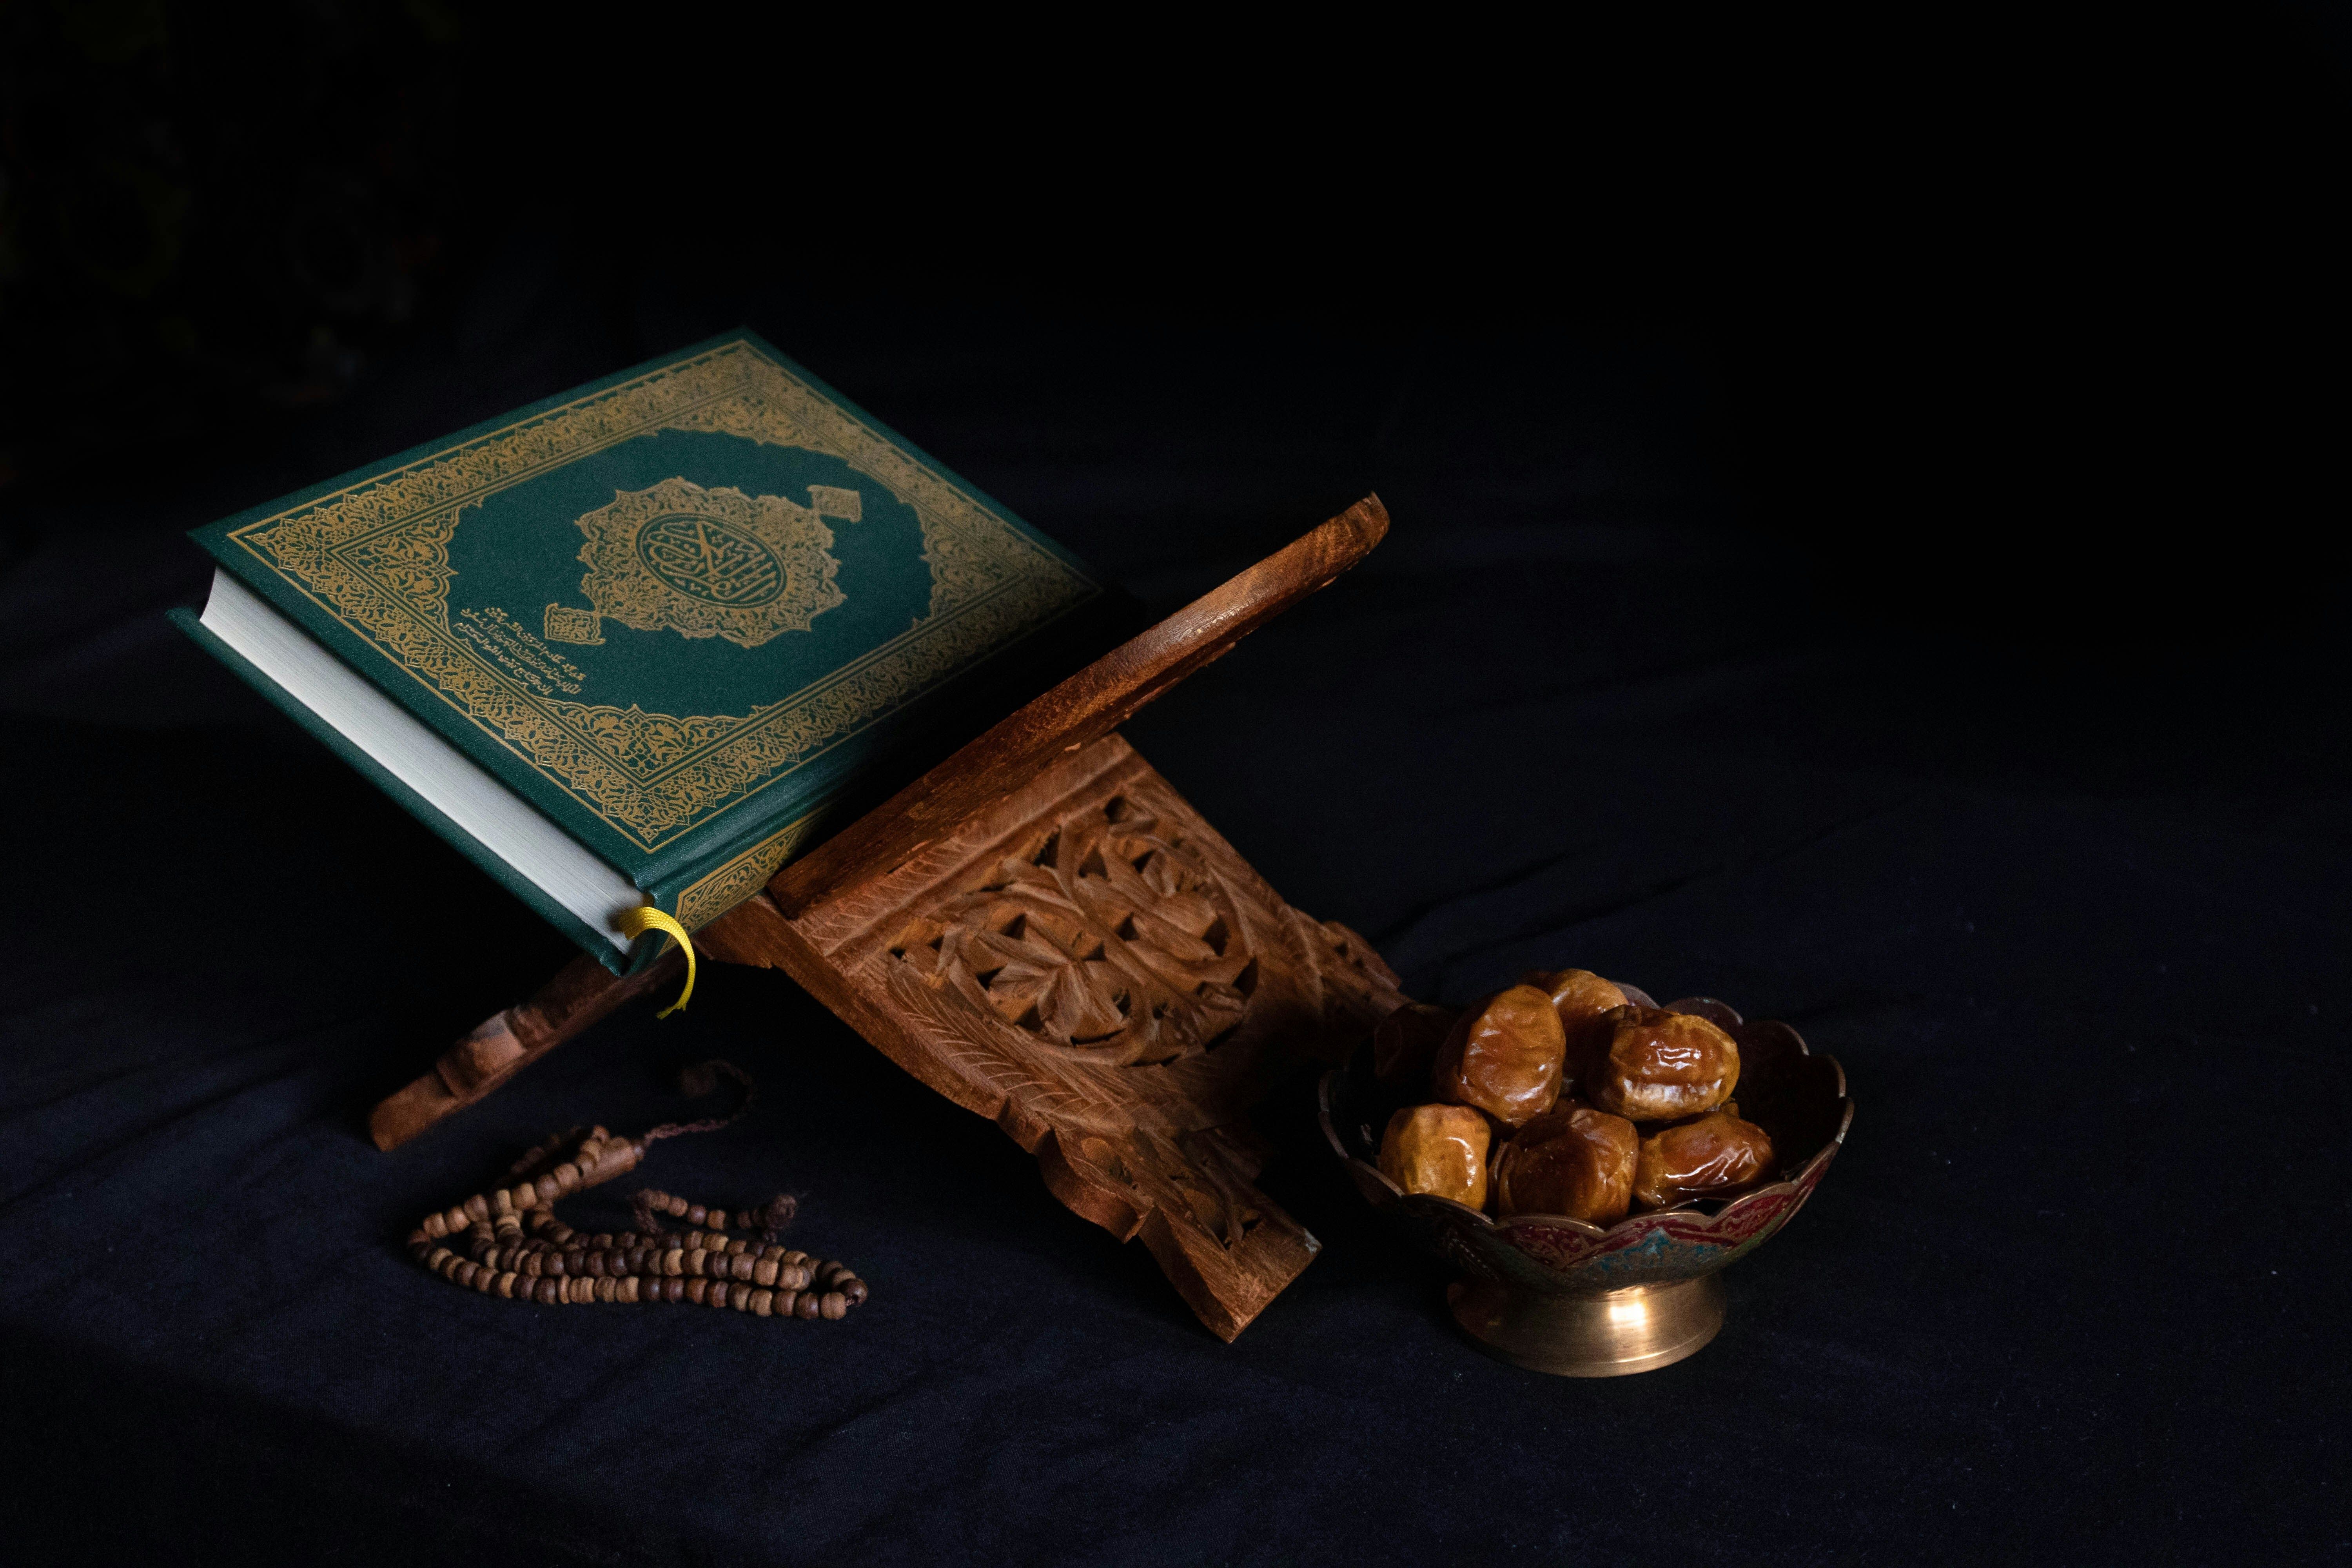 Prepare for Ramadan with MyLLife Inc: How to read the Qur’an for better understanding and practical guidance